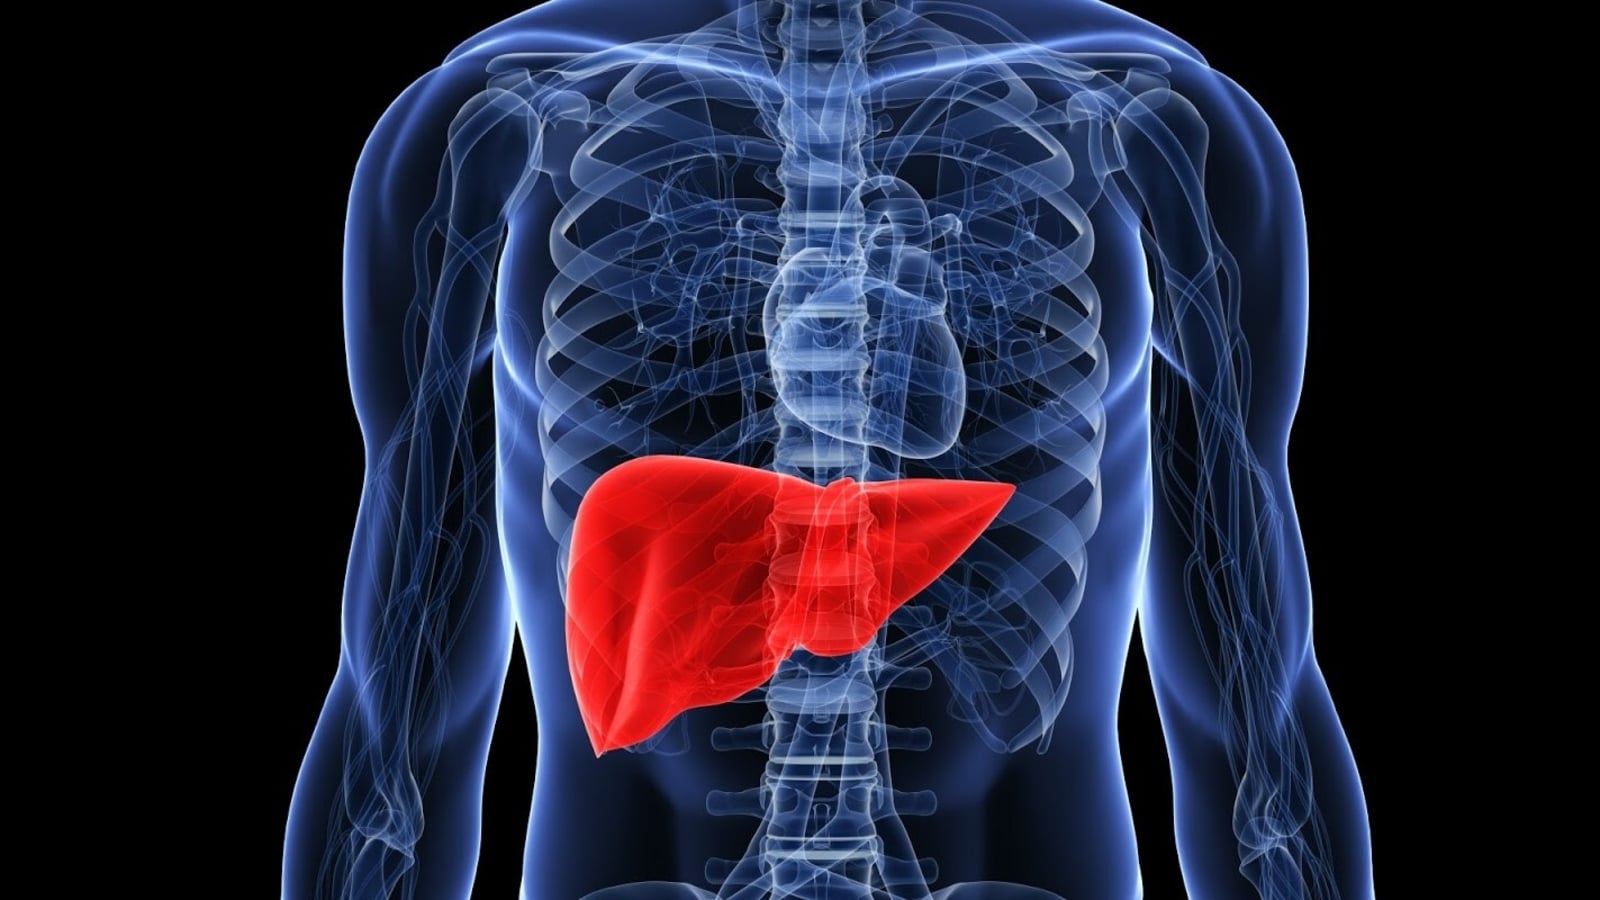 Fatty liver cure tips: Nutritional diet, supplements, lifestyle, fitness tweaks | Health